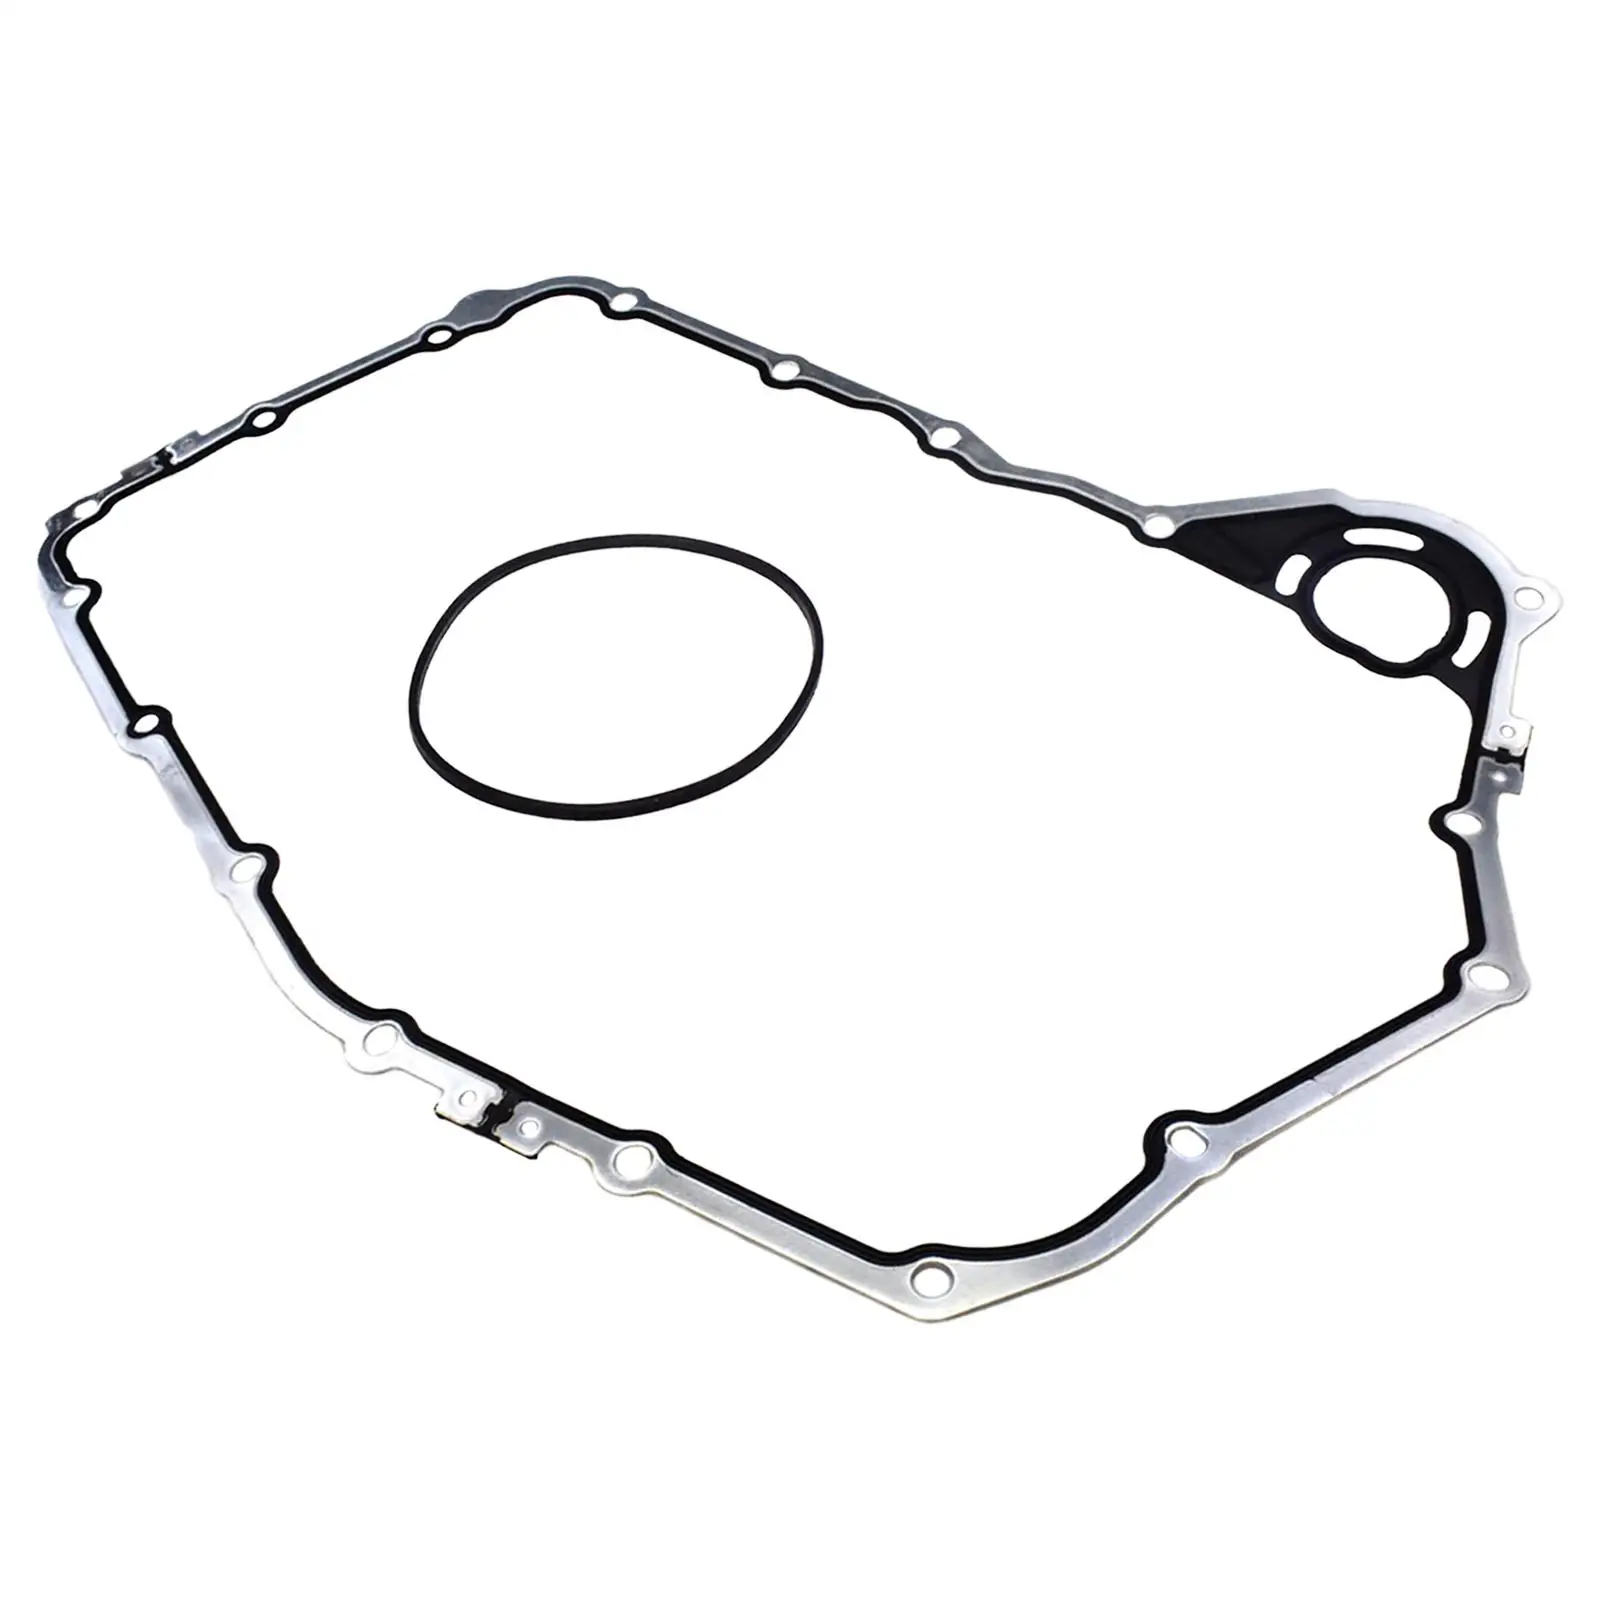 4T65E Engine Automatic Transmission Case Gasket Side Cover Seal Kit, 24206959for Buick 3.0 2.5/S80 ,Vehicles Replacement Rubber